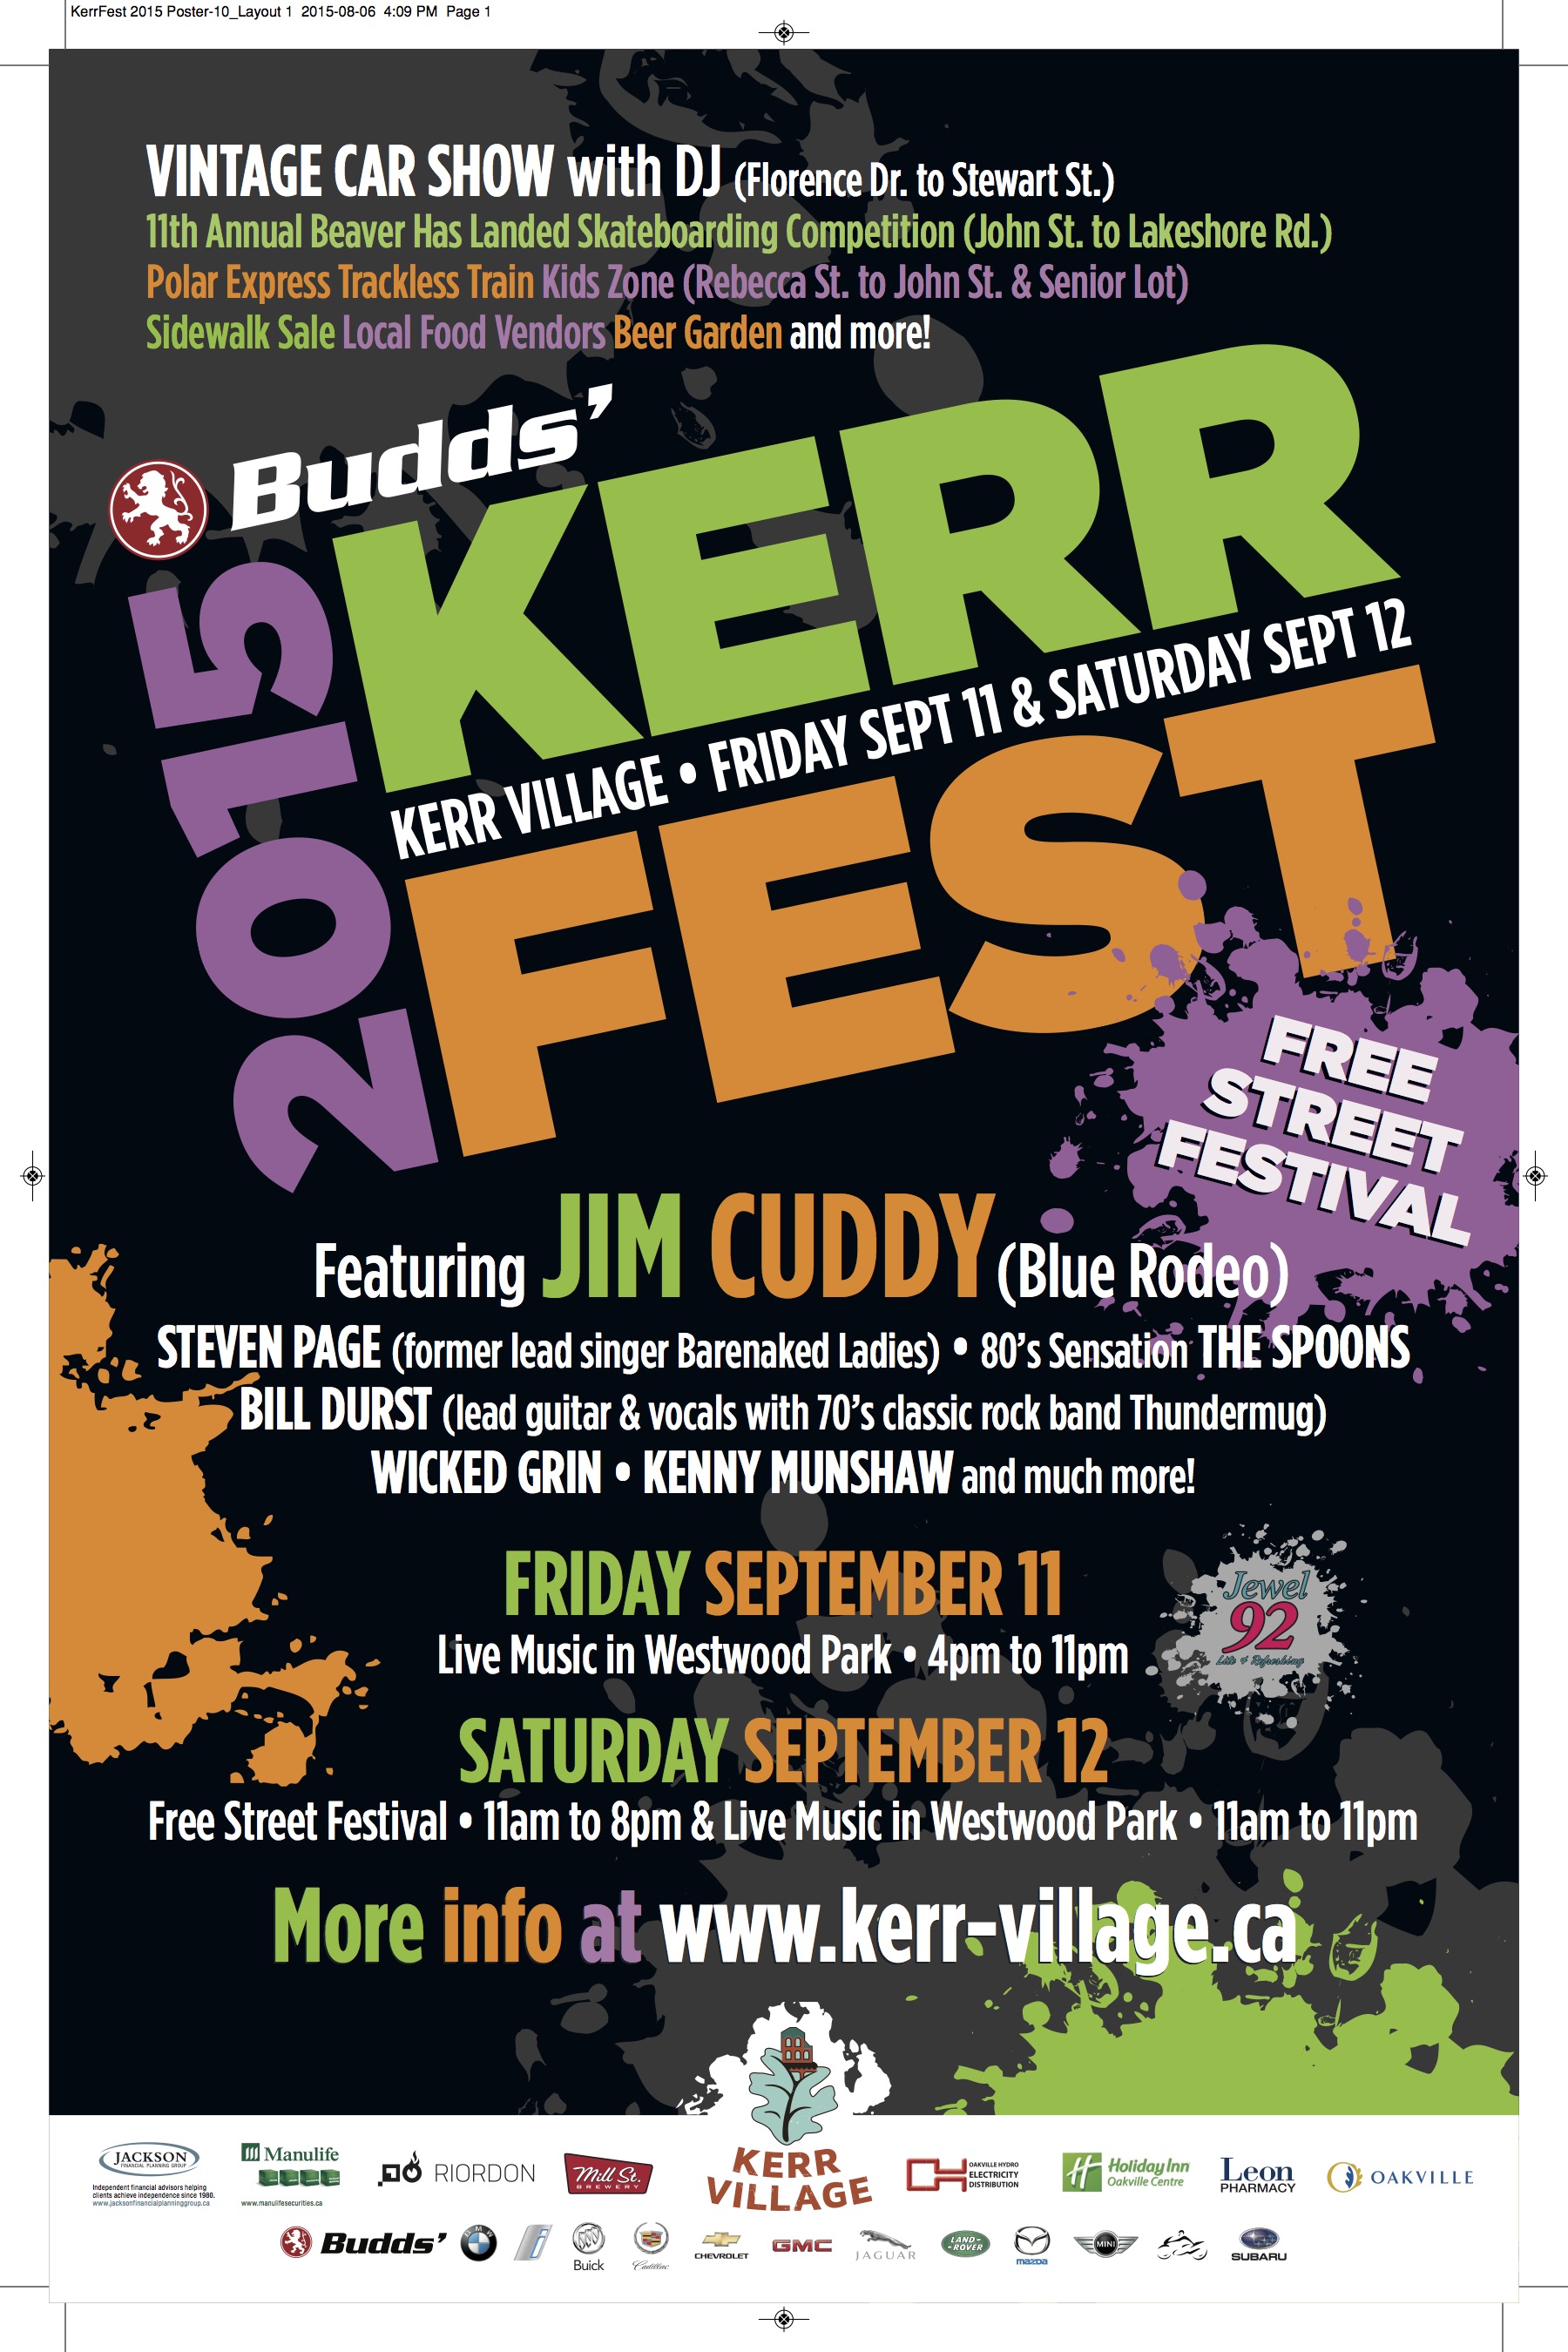 Kerrfest 2015 Presented by Budds', catch all of the Action!